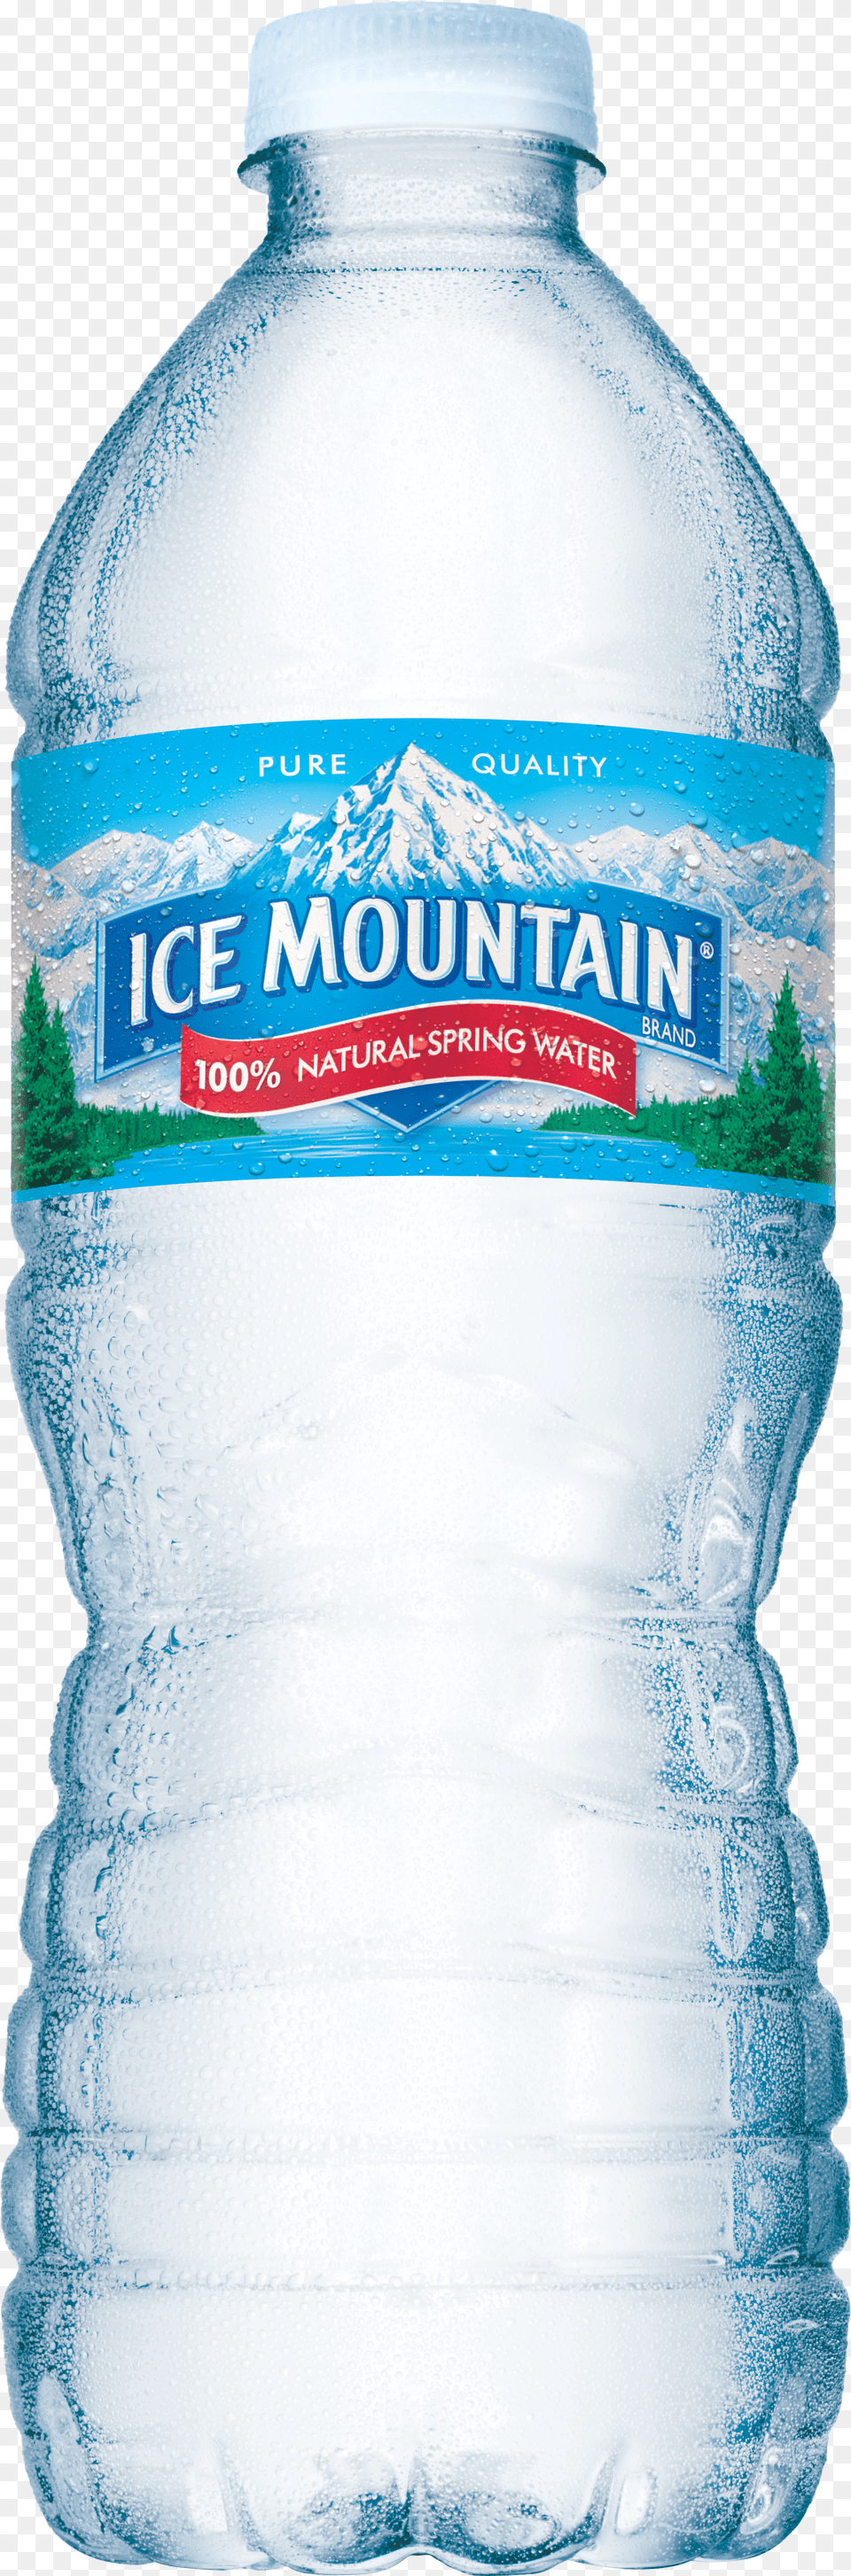 Bottle Of Water Png Image